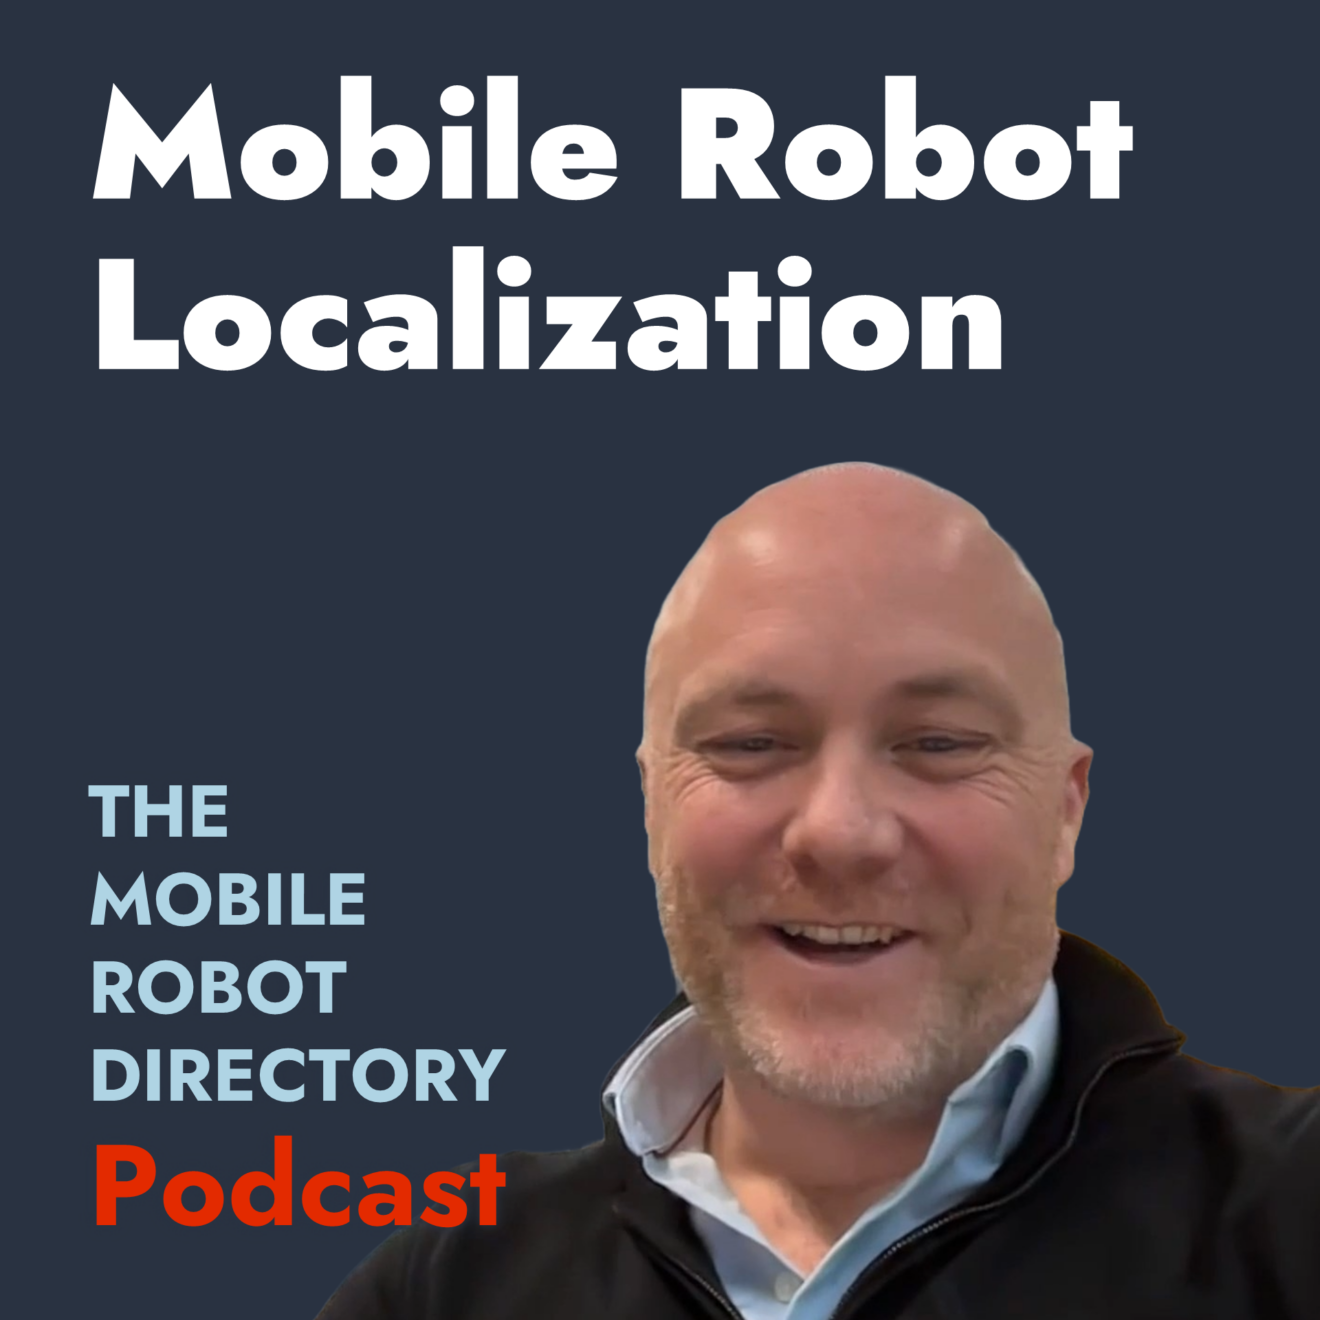 Podcast Episode 1: AMR/AGV Localization with Accerion’s Vincent Burg